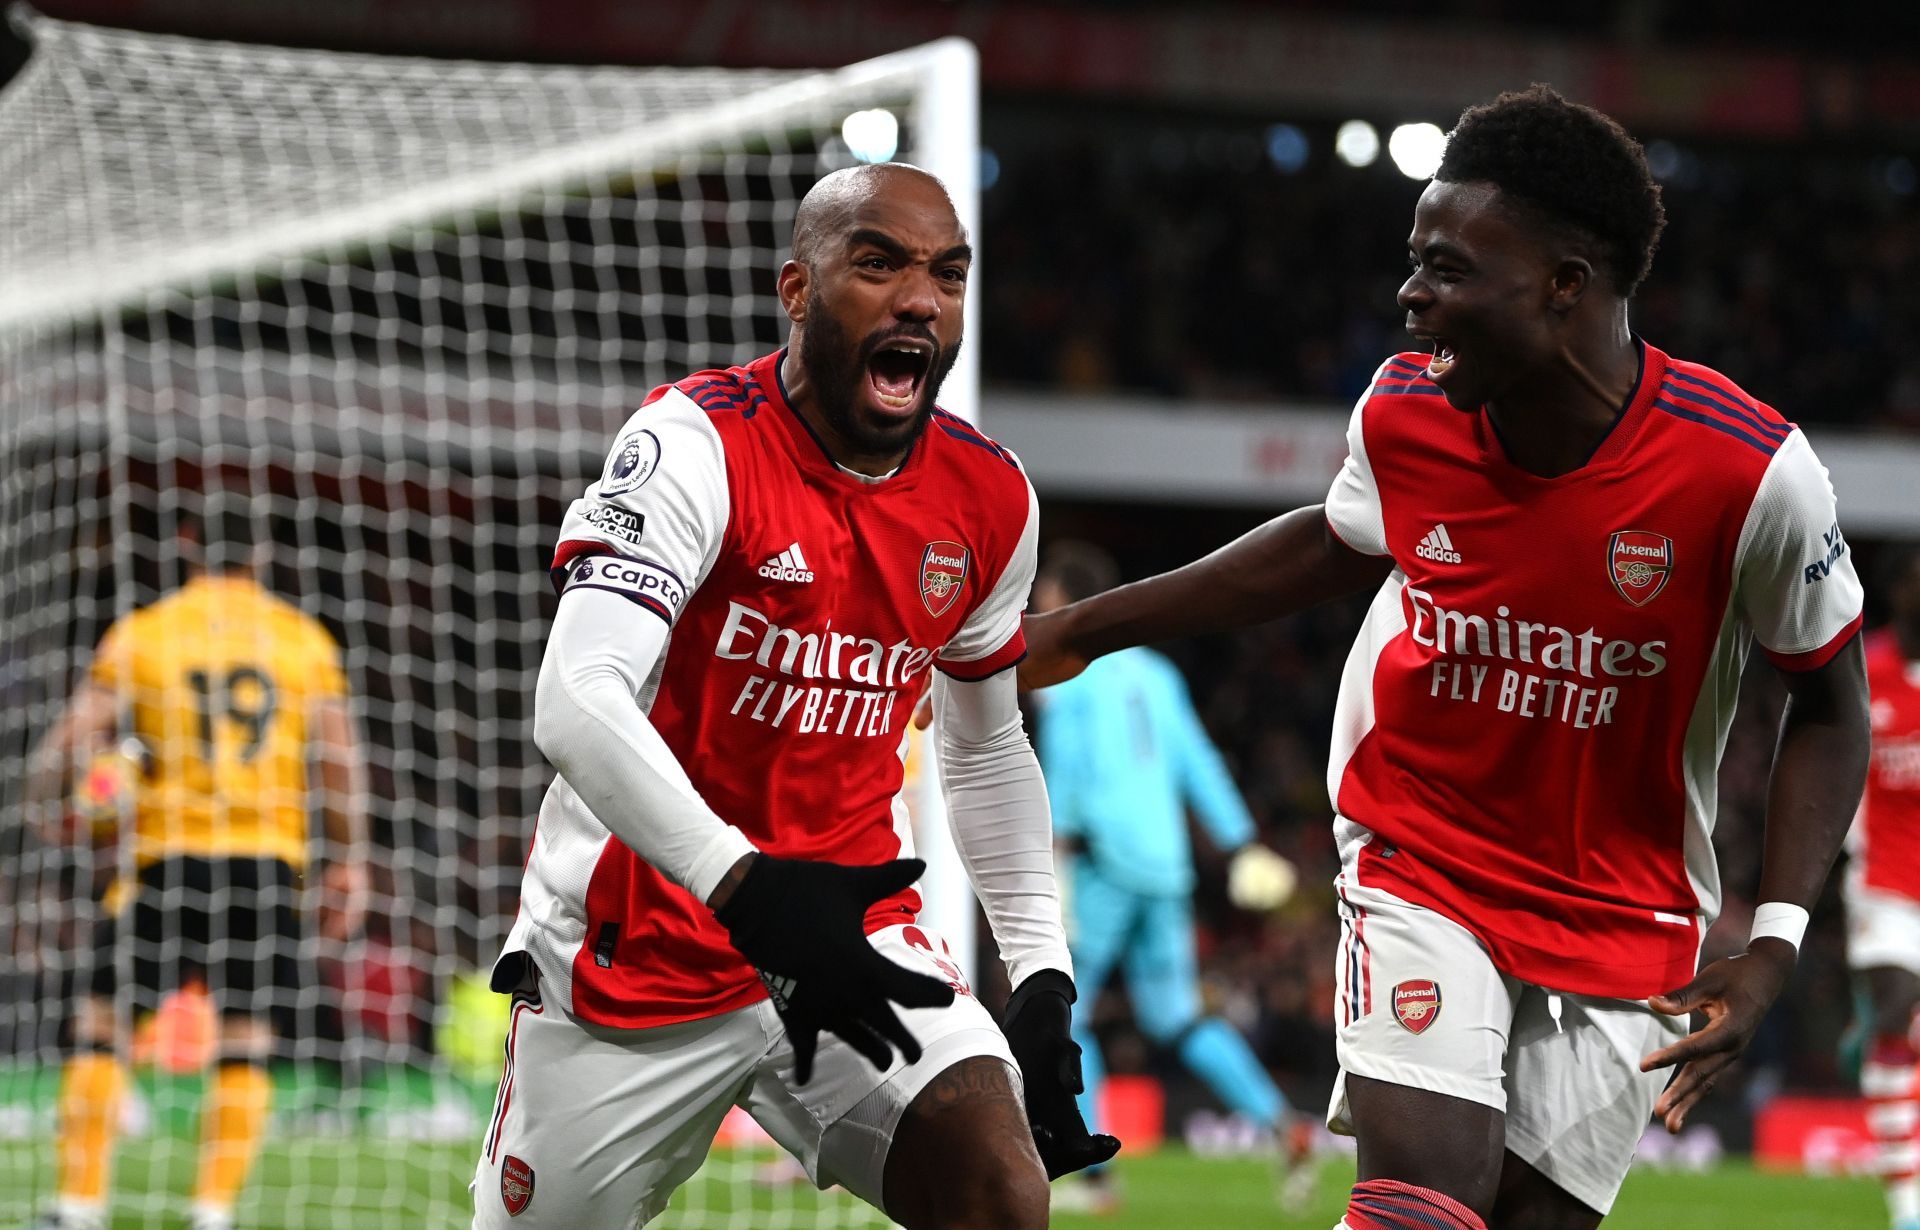 The Gunners have been a joy to watch this season